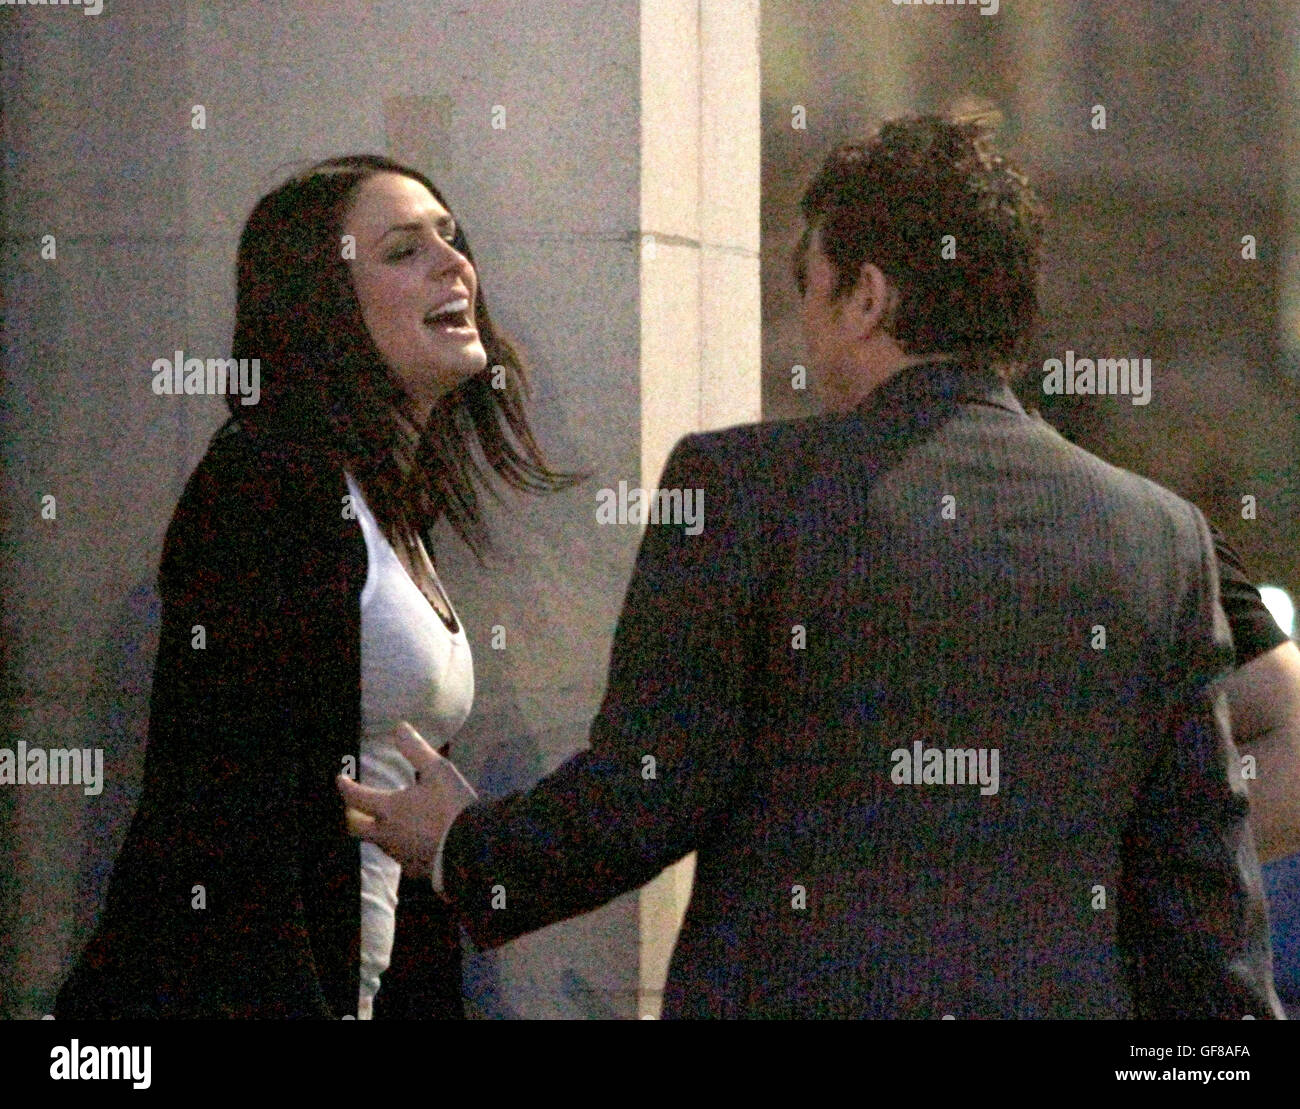 TV presenter Susie Amy and Eastenders actor Shane Richie enjoy a night out in Soho, London England 15.04.10 Stock Photo